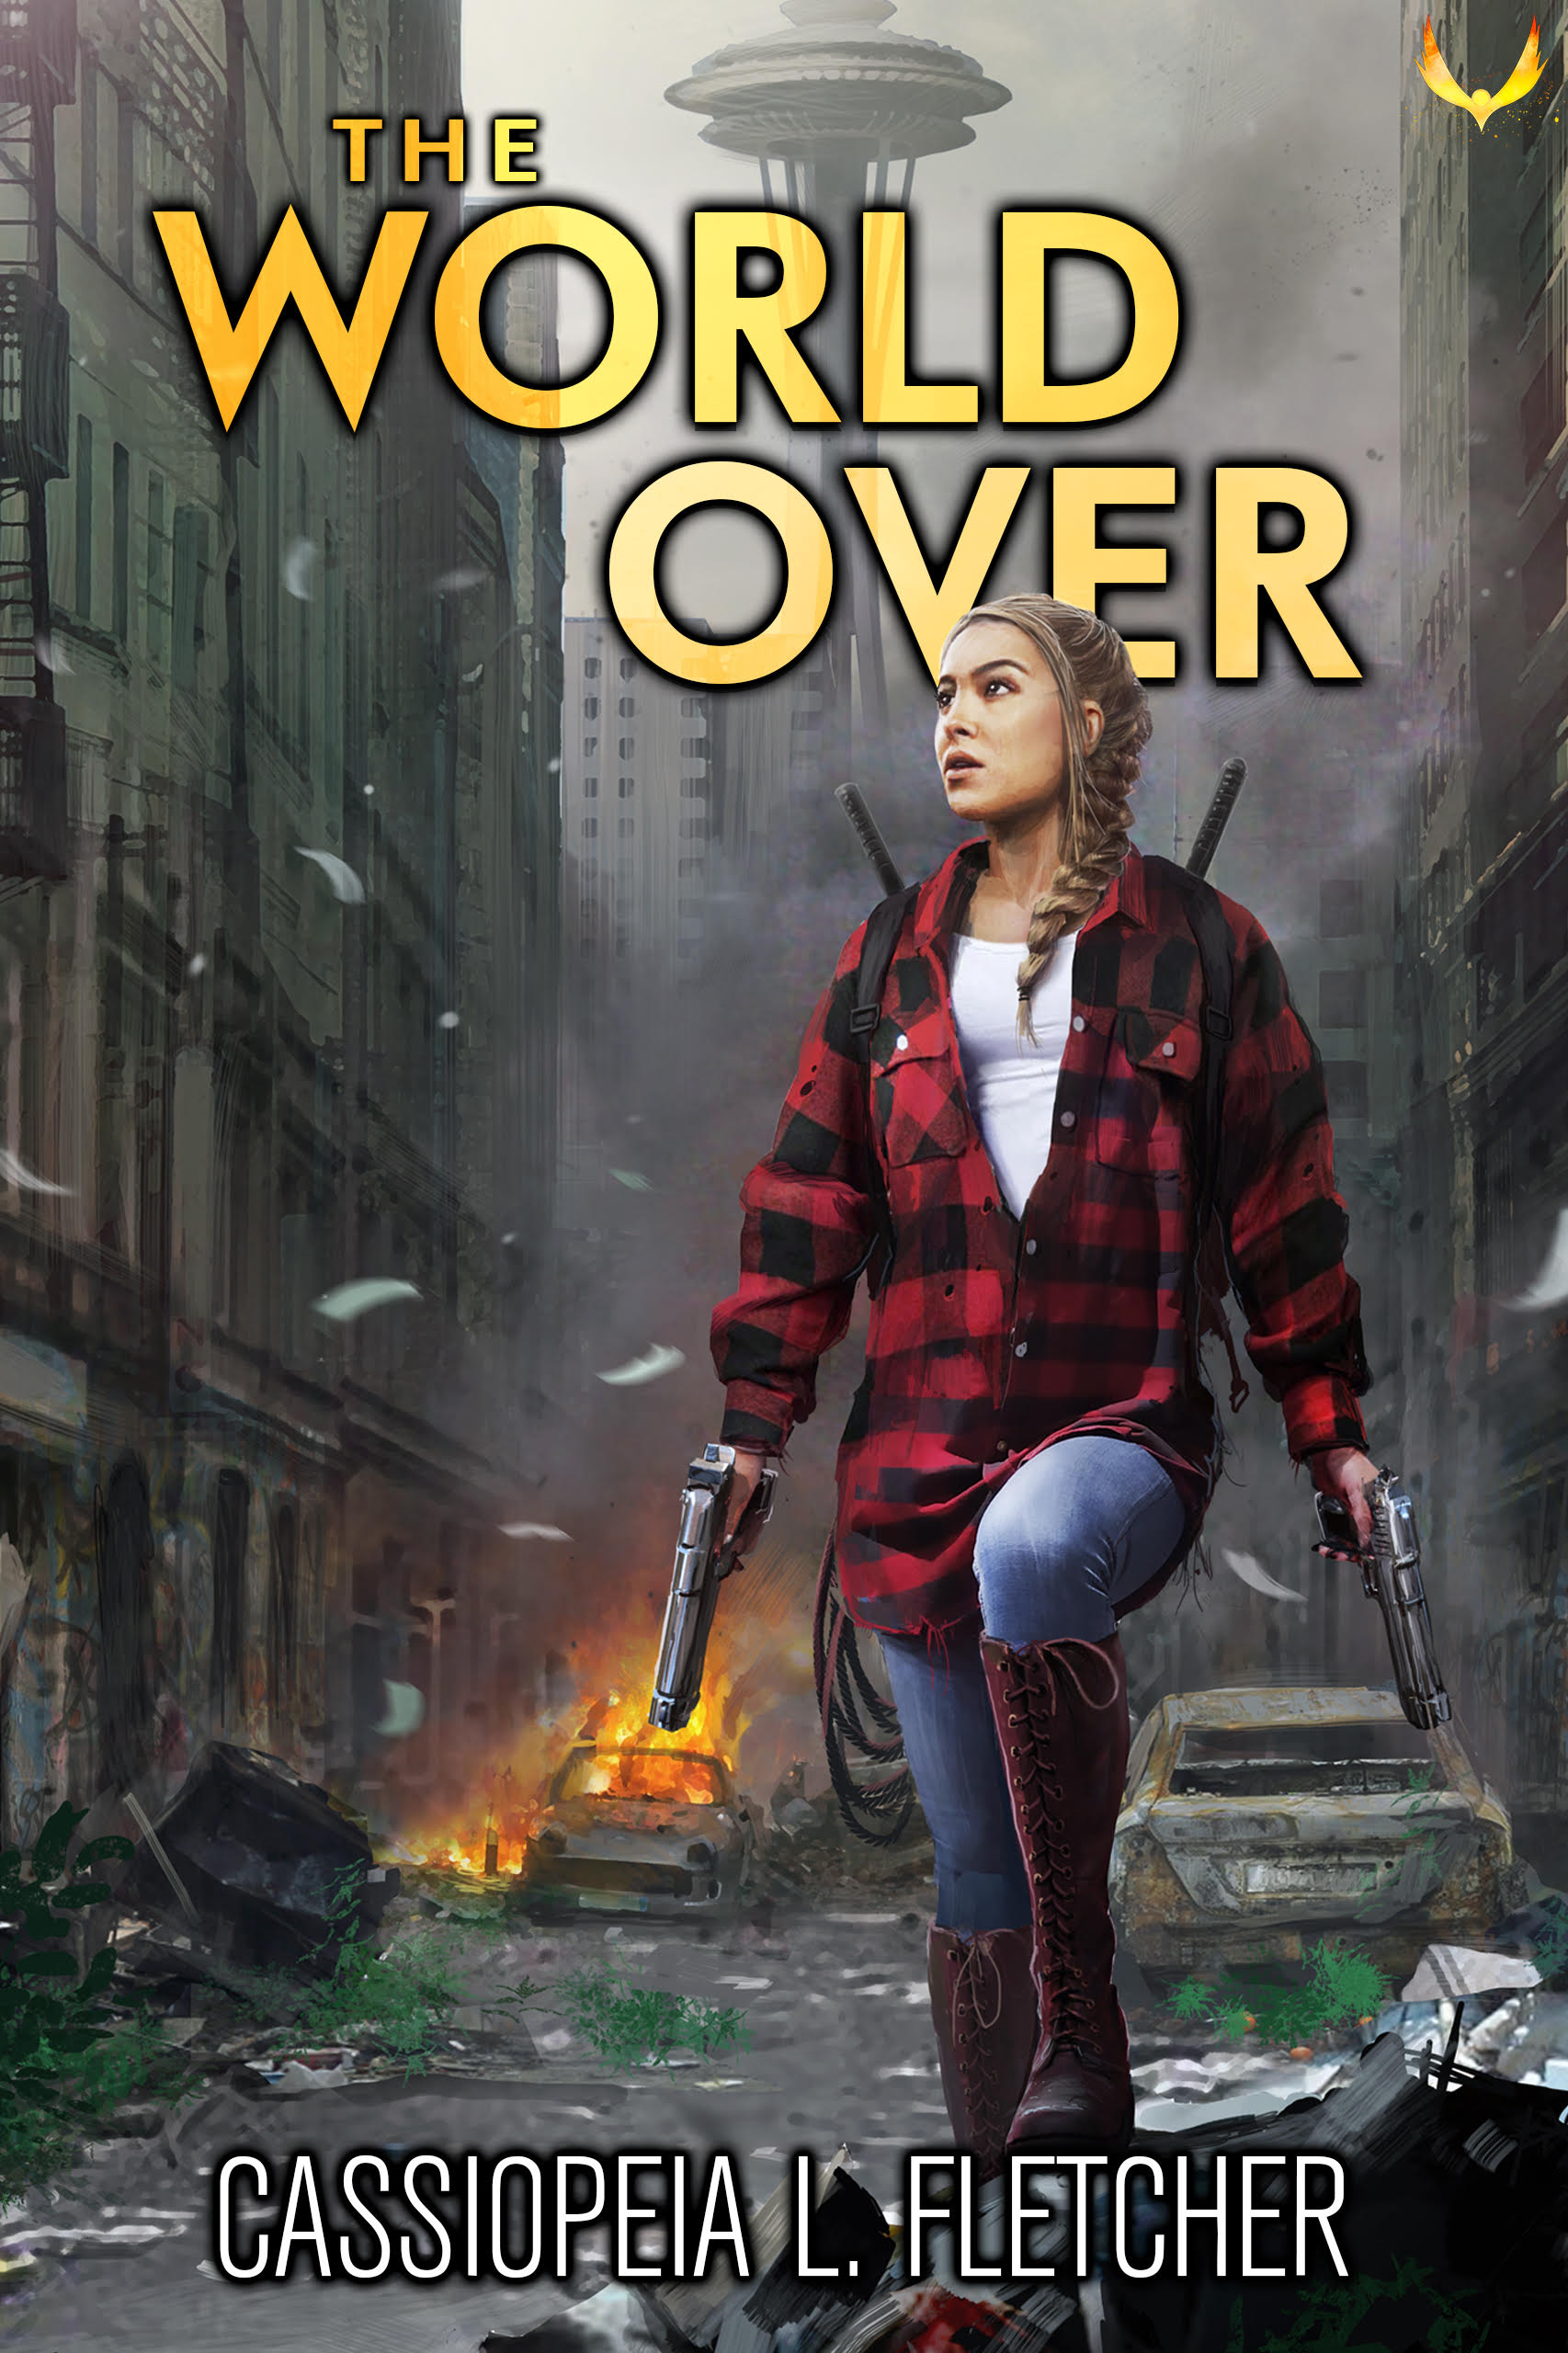 Woman in post-apocalyptic world - The World Over